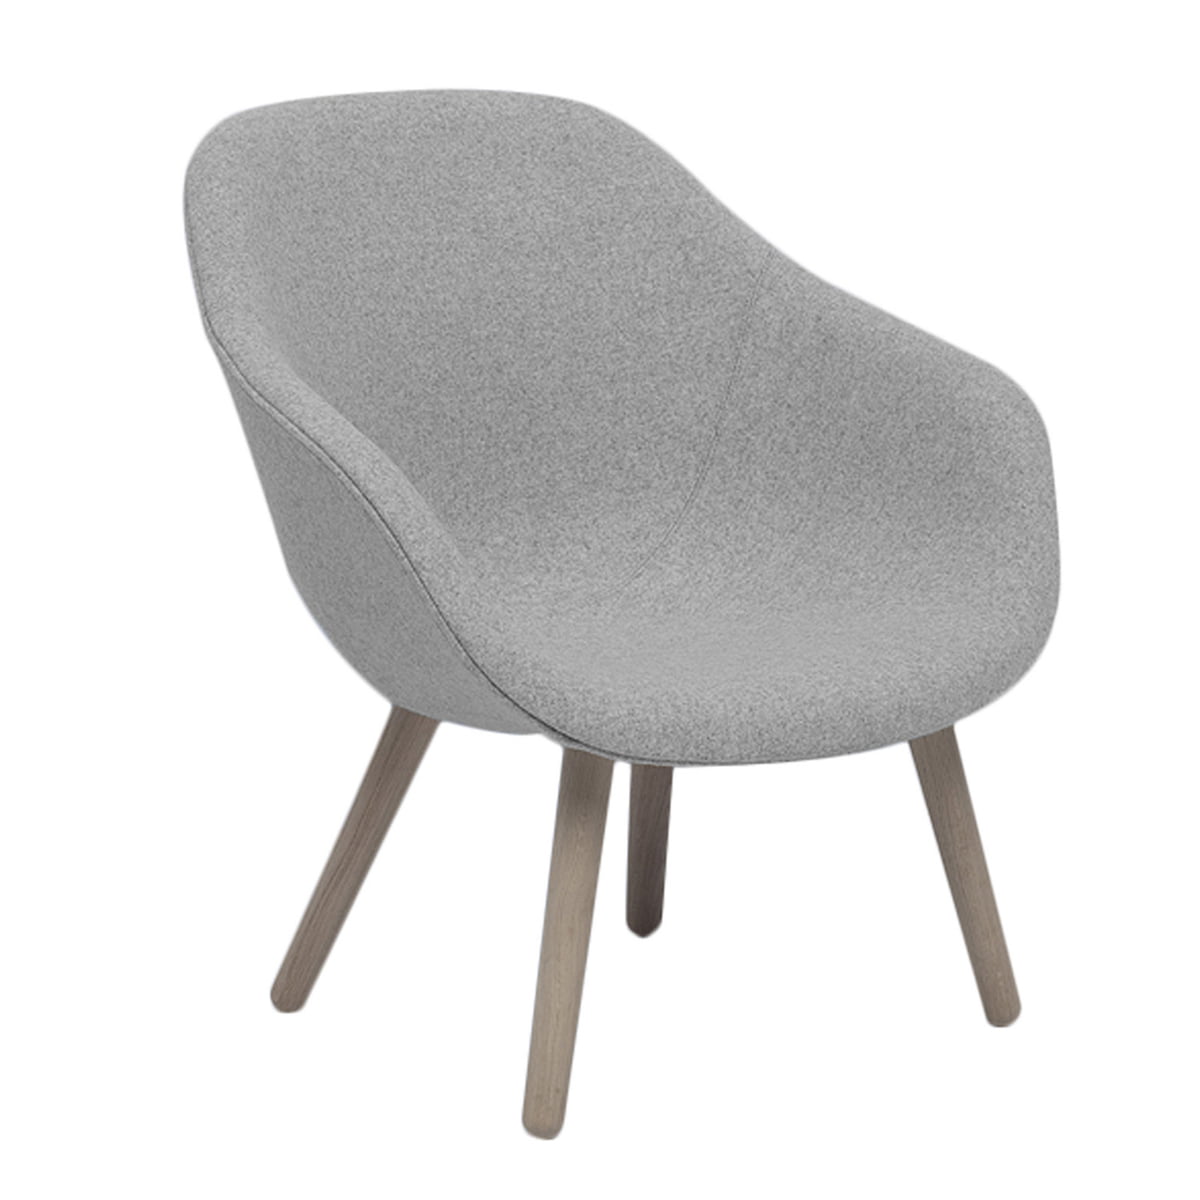 Schat koper Lang Hay - About a lounge chair aal 82 | Connox